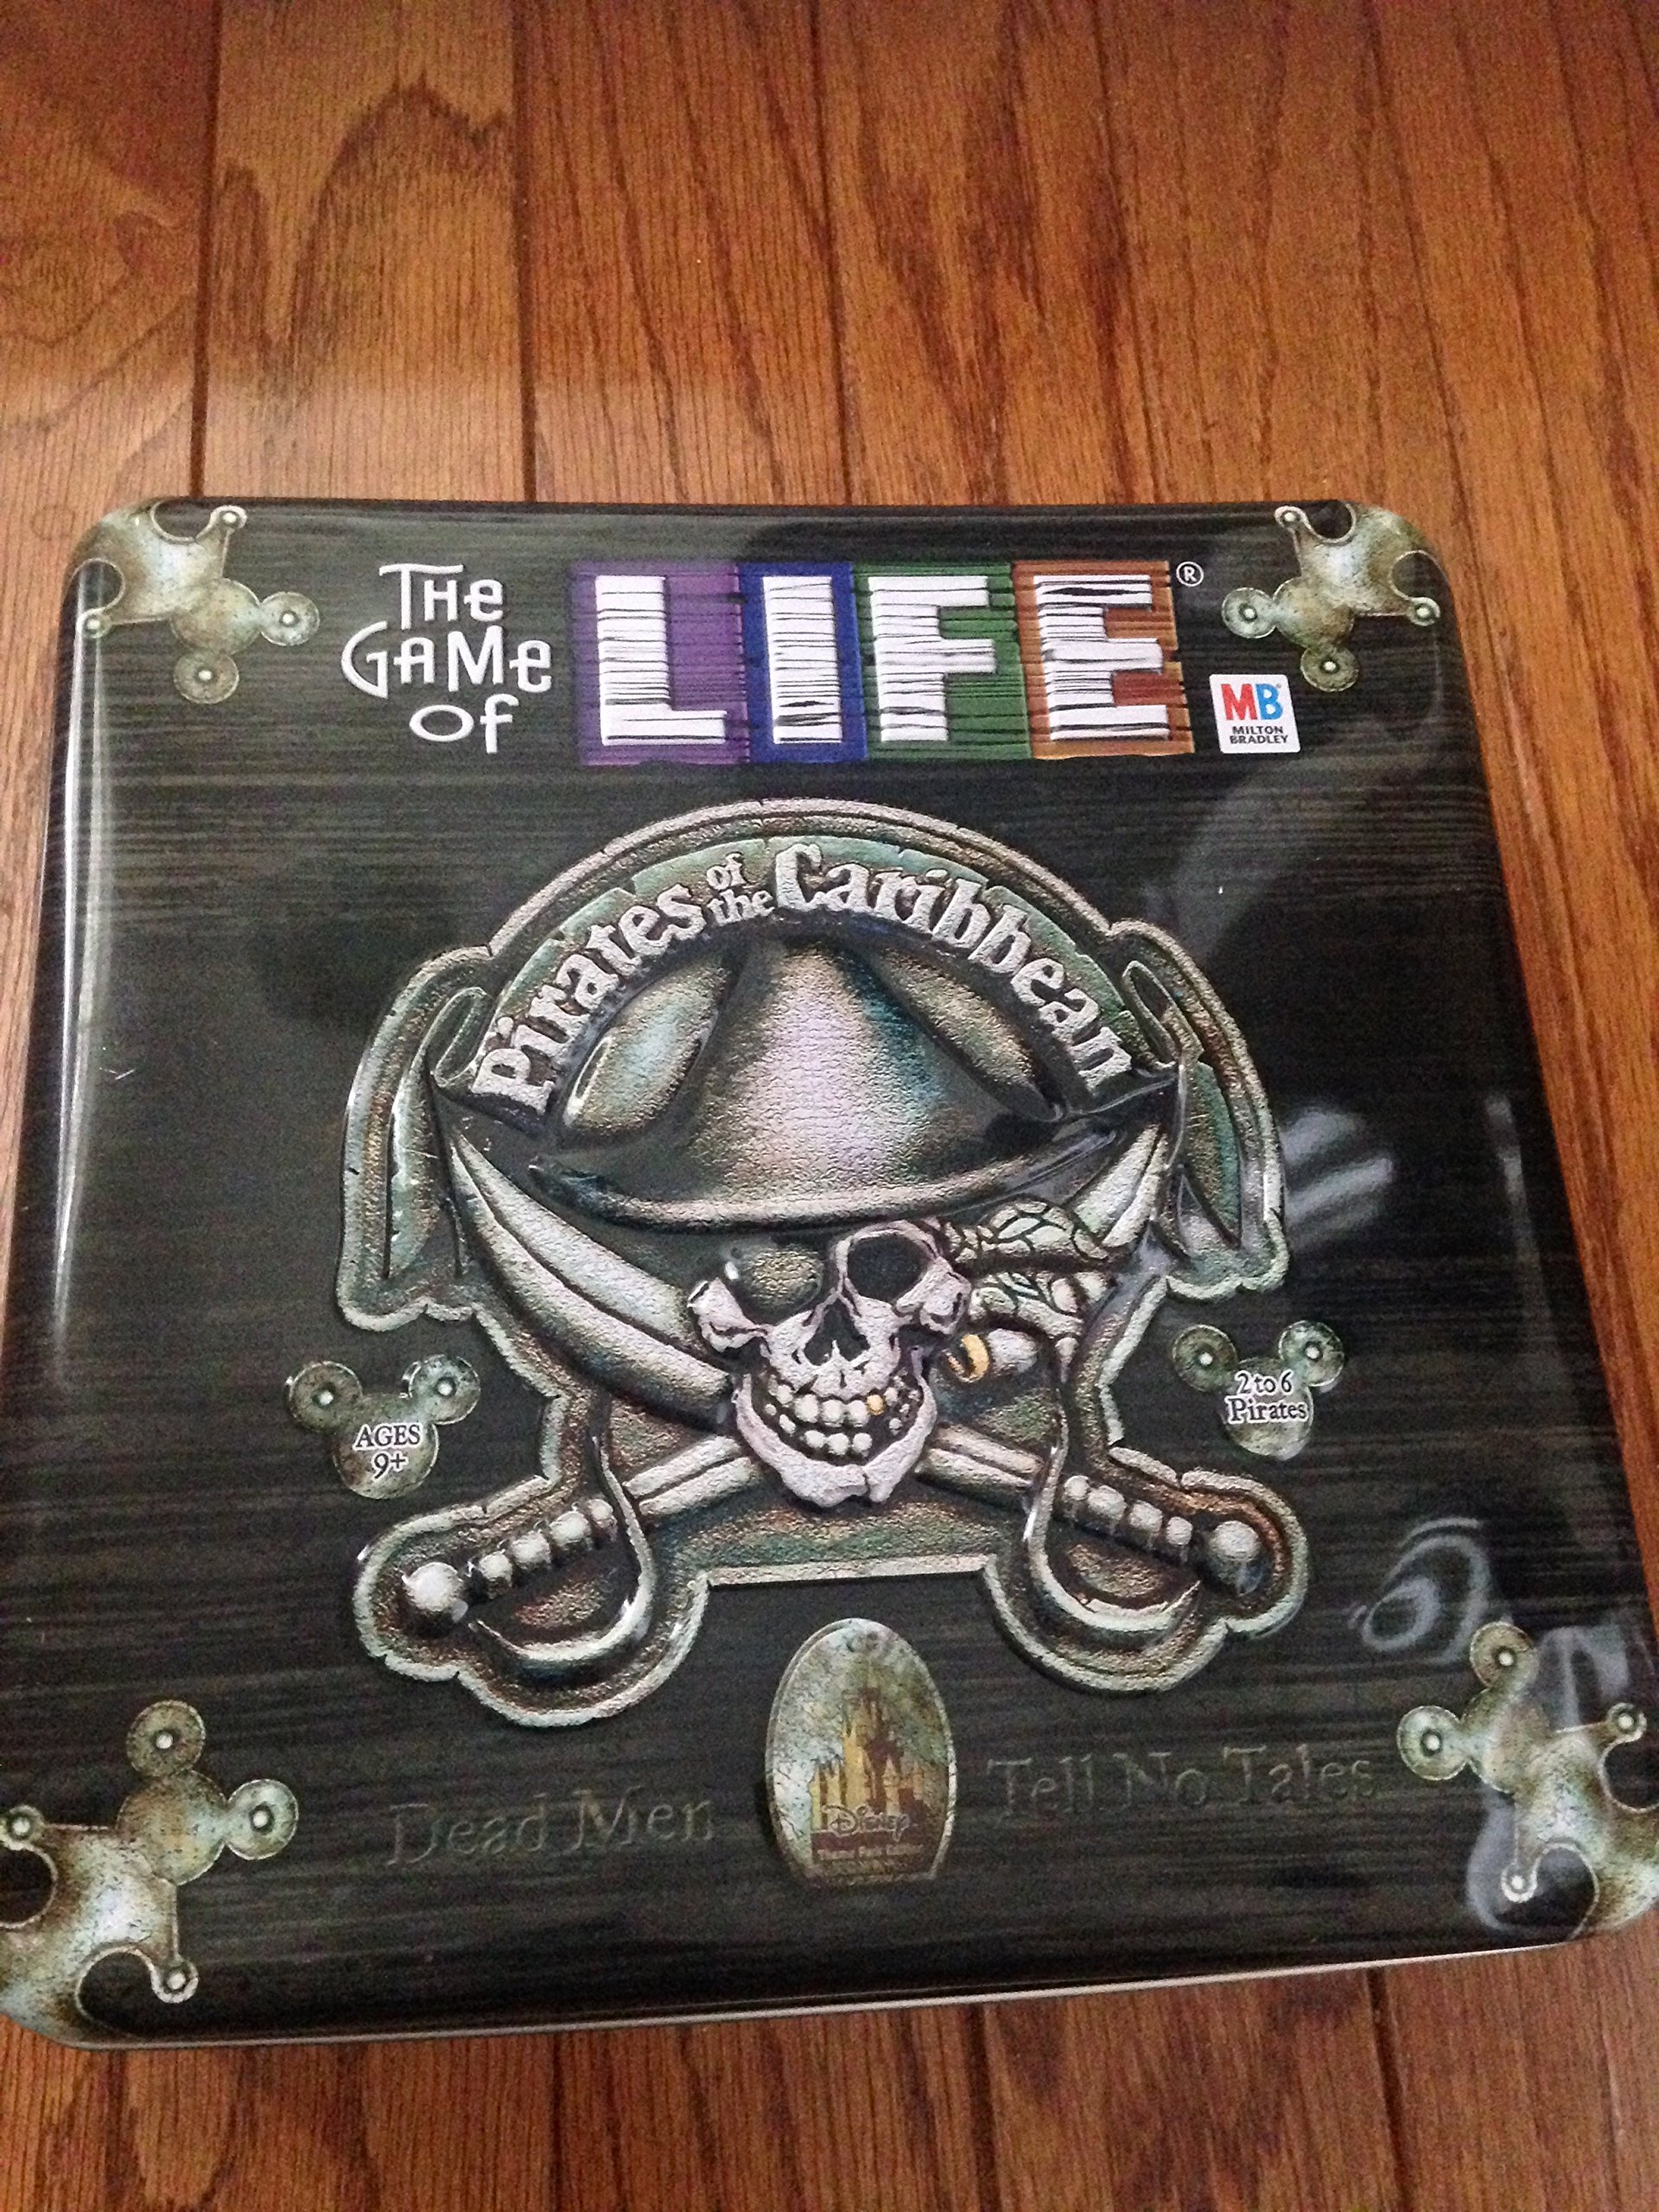 The Game of Life Pirates of the Caribbean Collectors Tin